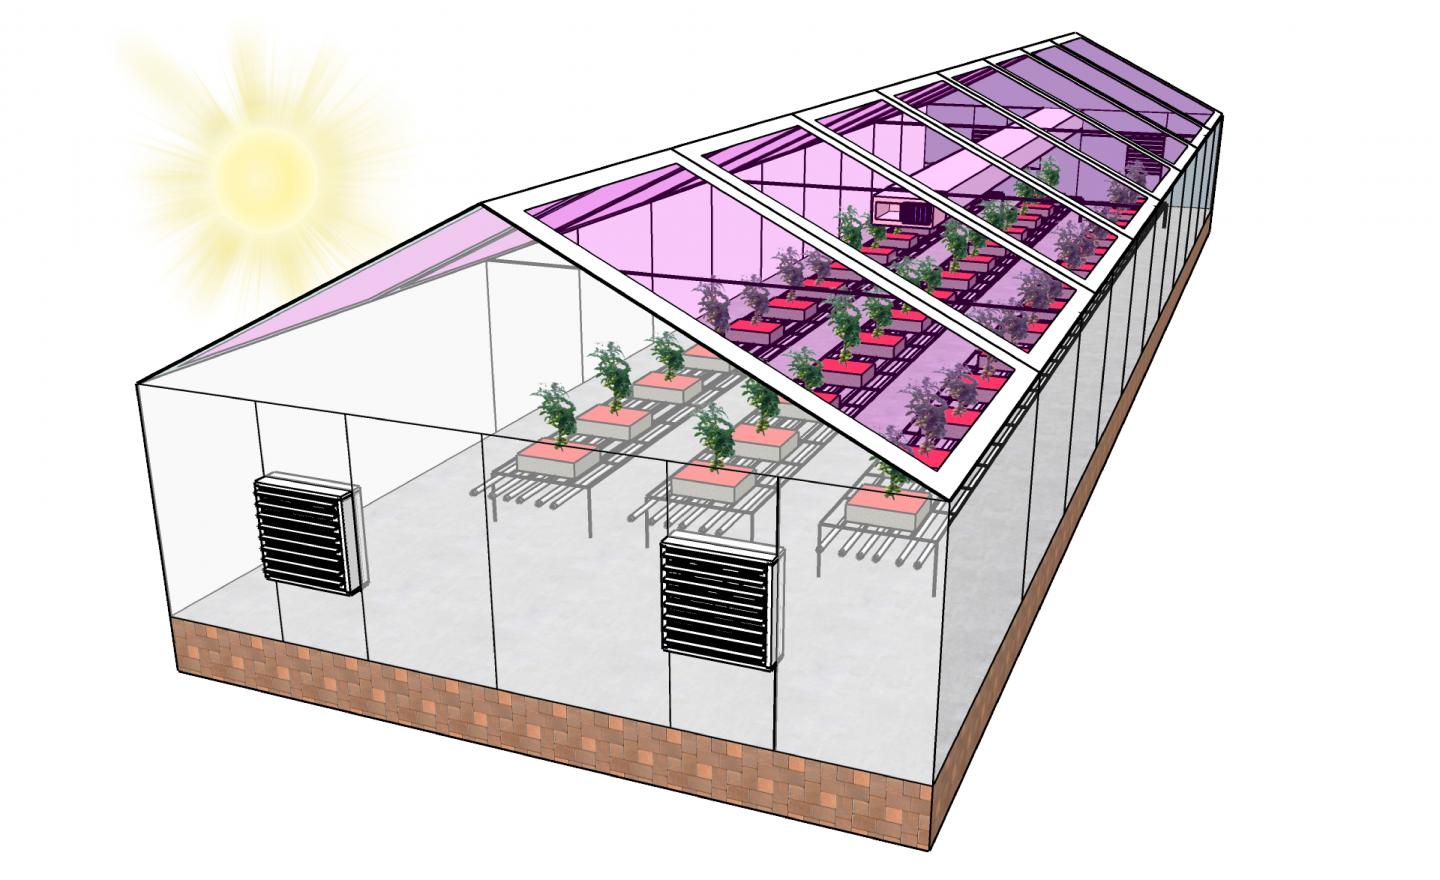 Many greenhouses could become energy neutral by using see-through solar panels to harvest energy - primarily from the wavelengths of light that plants don't use for photosynthesis. In some places this could make greenhouses energy neutral, or even allow them to generate enough electricity to sell it back to the grid -- creating a new revenue stream for growers. Source: Brendan O'Connor, NC State University